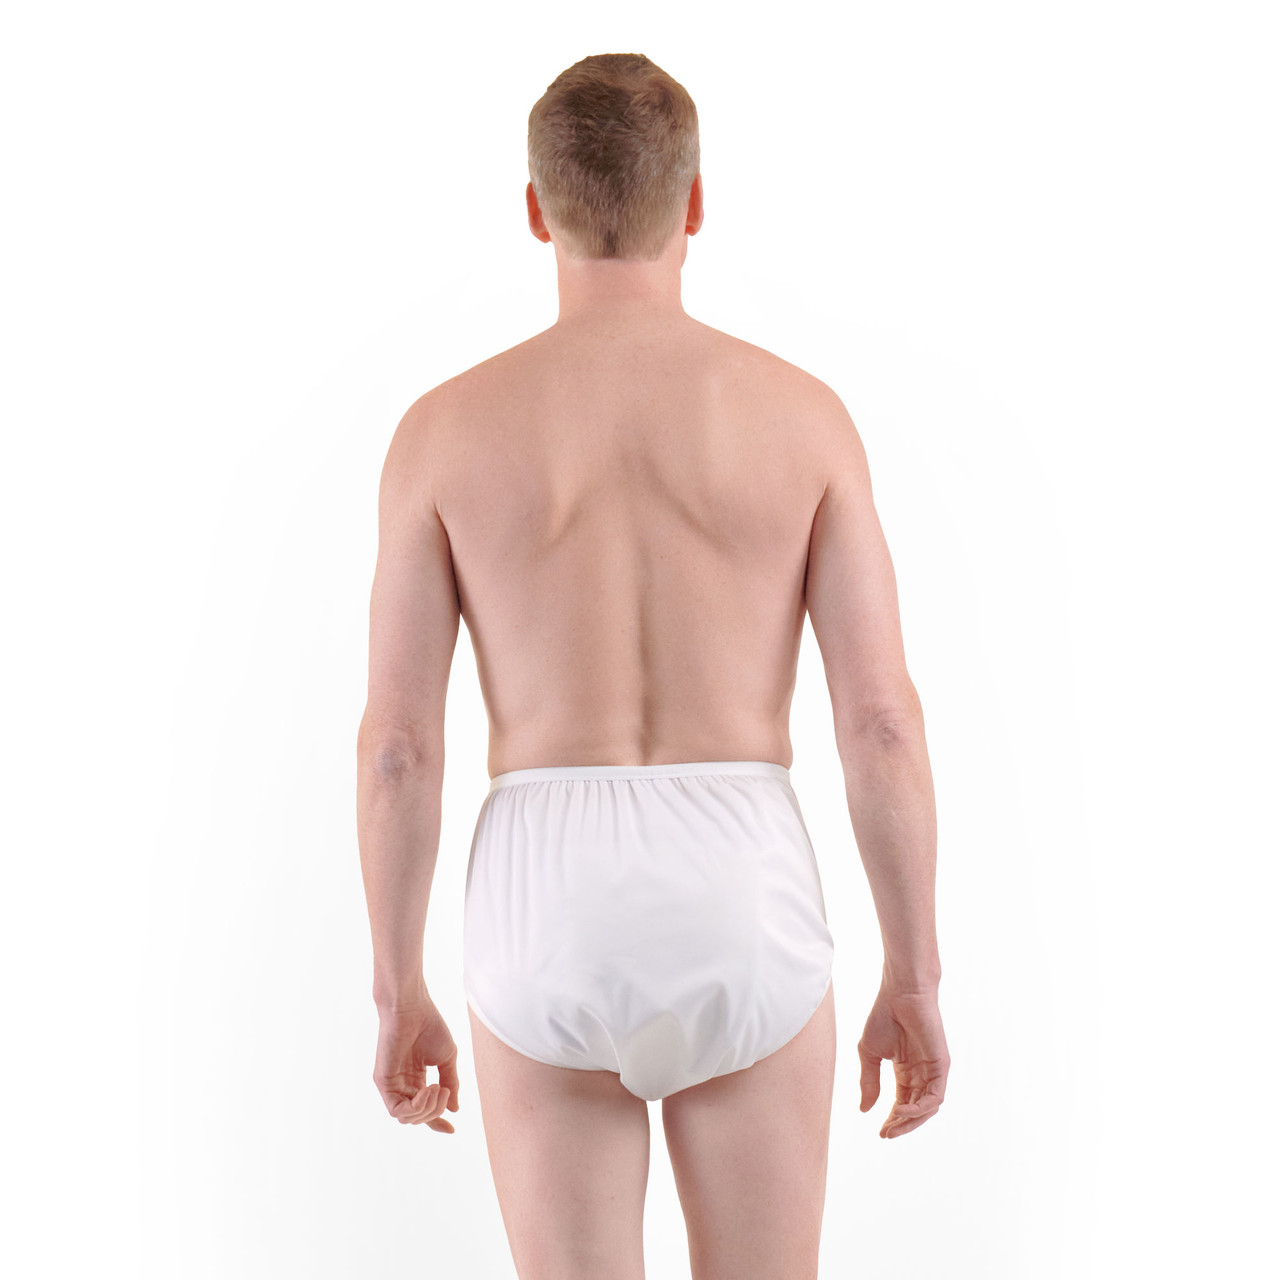 InControlDiapers on X: Protective Waterproof pants are an essential  accessory for anyone who deals with incontinence. Rubber pants are great  with reducing odor and protection against leaks!  # incontinence #adultdiapers